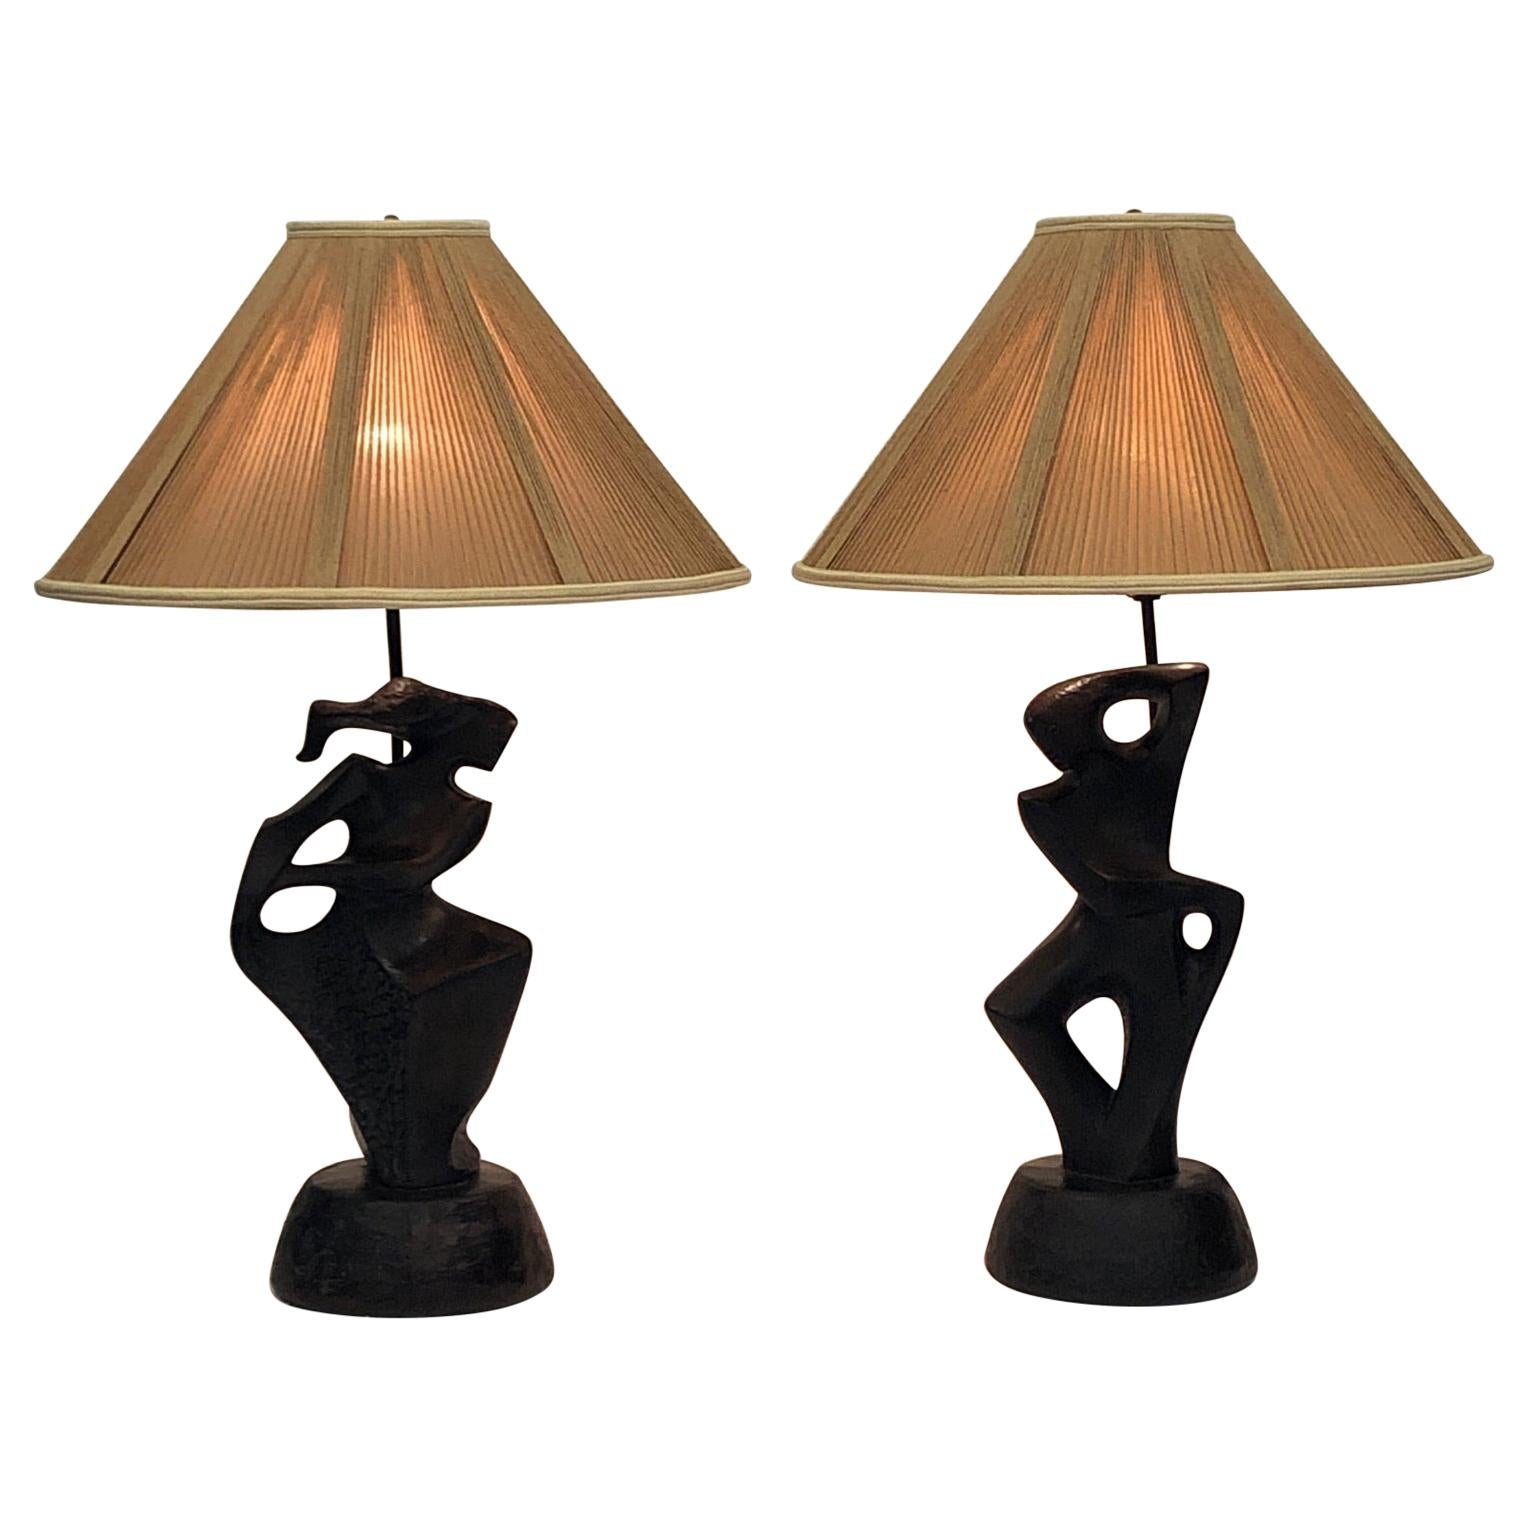 Pair of Black Lacquered Sculptural Table Lamps by Marianna von Allesch for RIMA